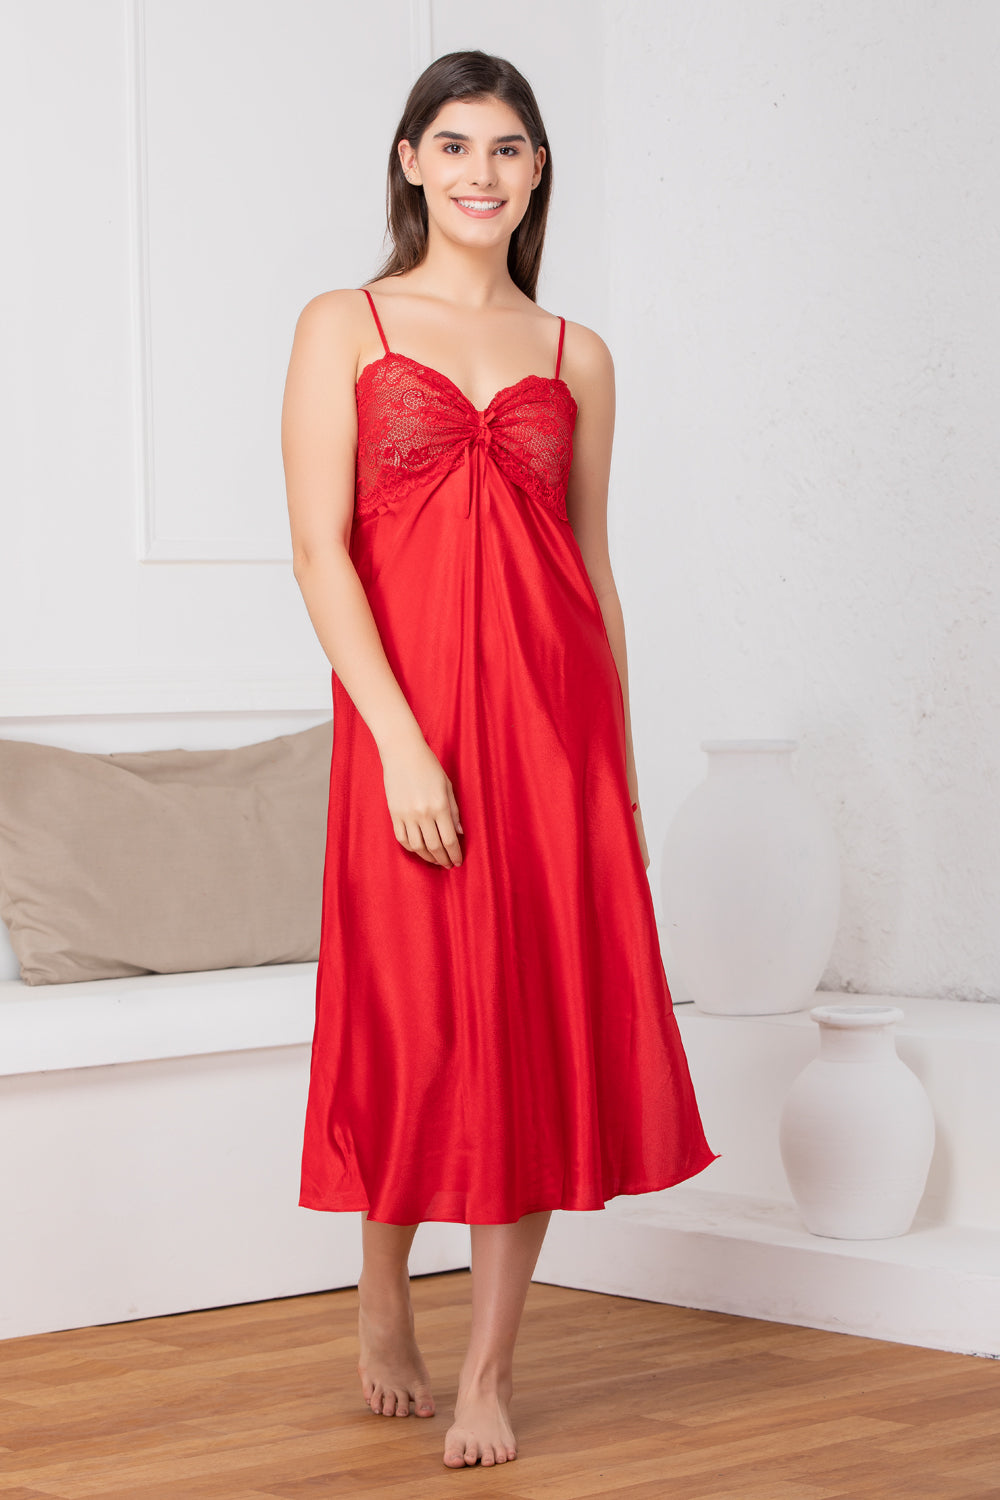 Print satin long nightgown set Private Lives